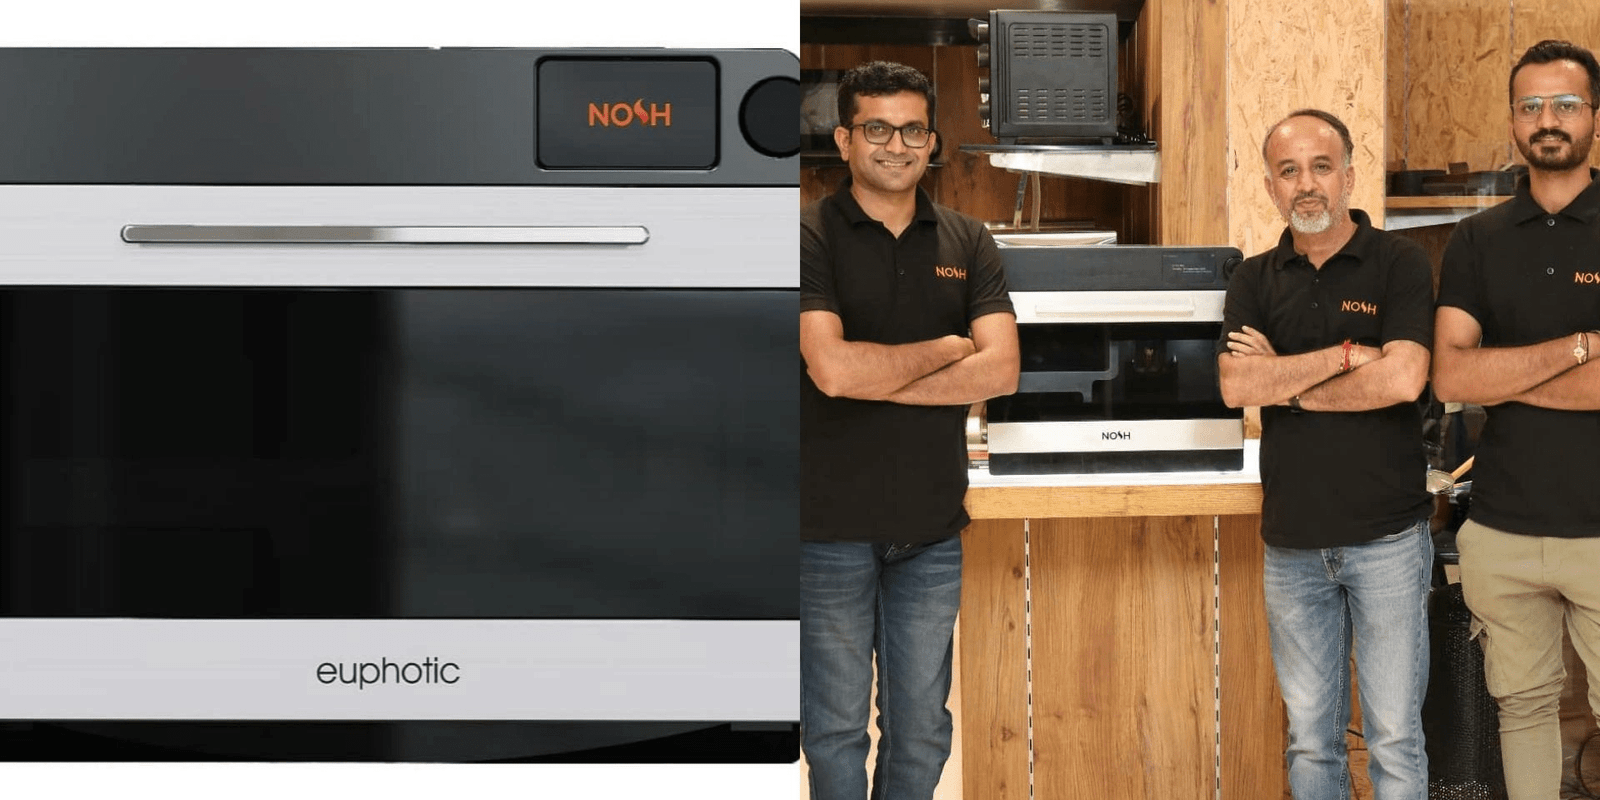 India’s First AI-Based Cooking Robot Nosh, Can Cook 200+ Dishes